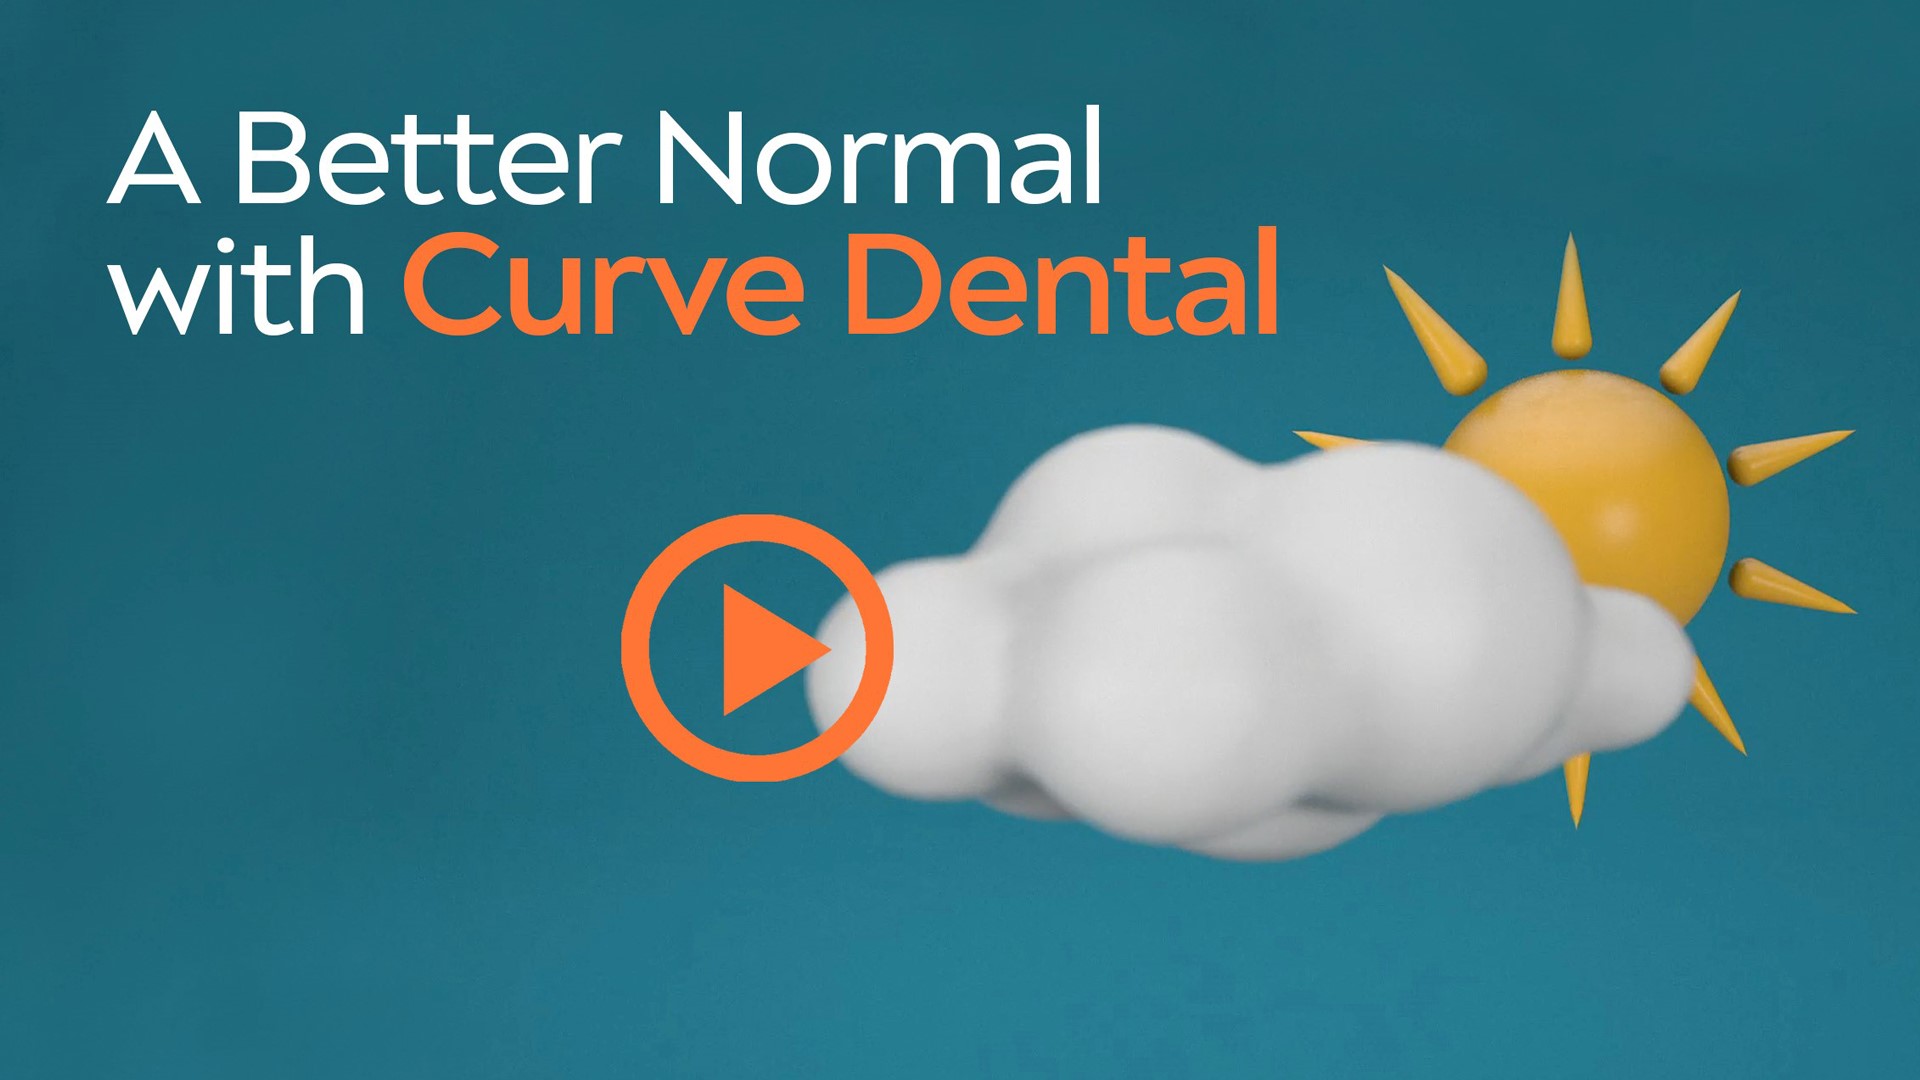 A Better Normal with Curve